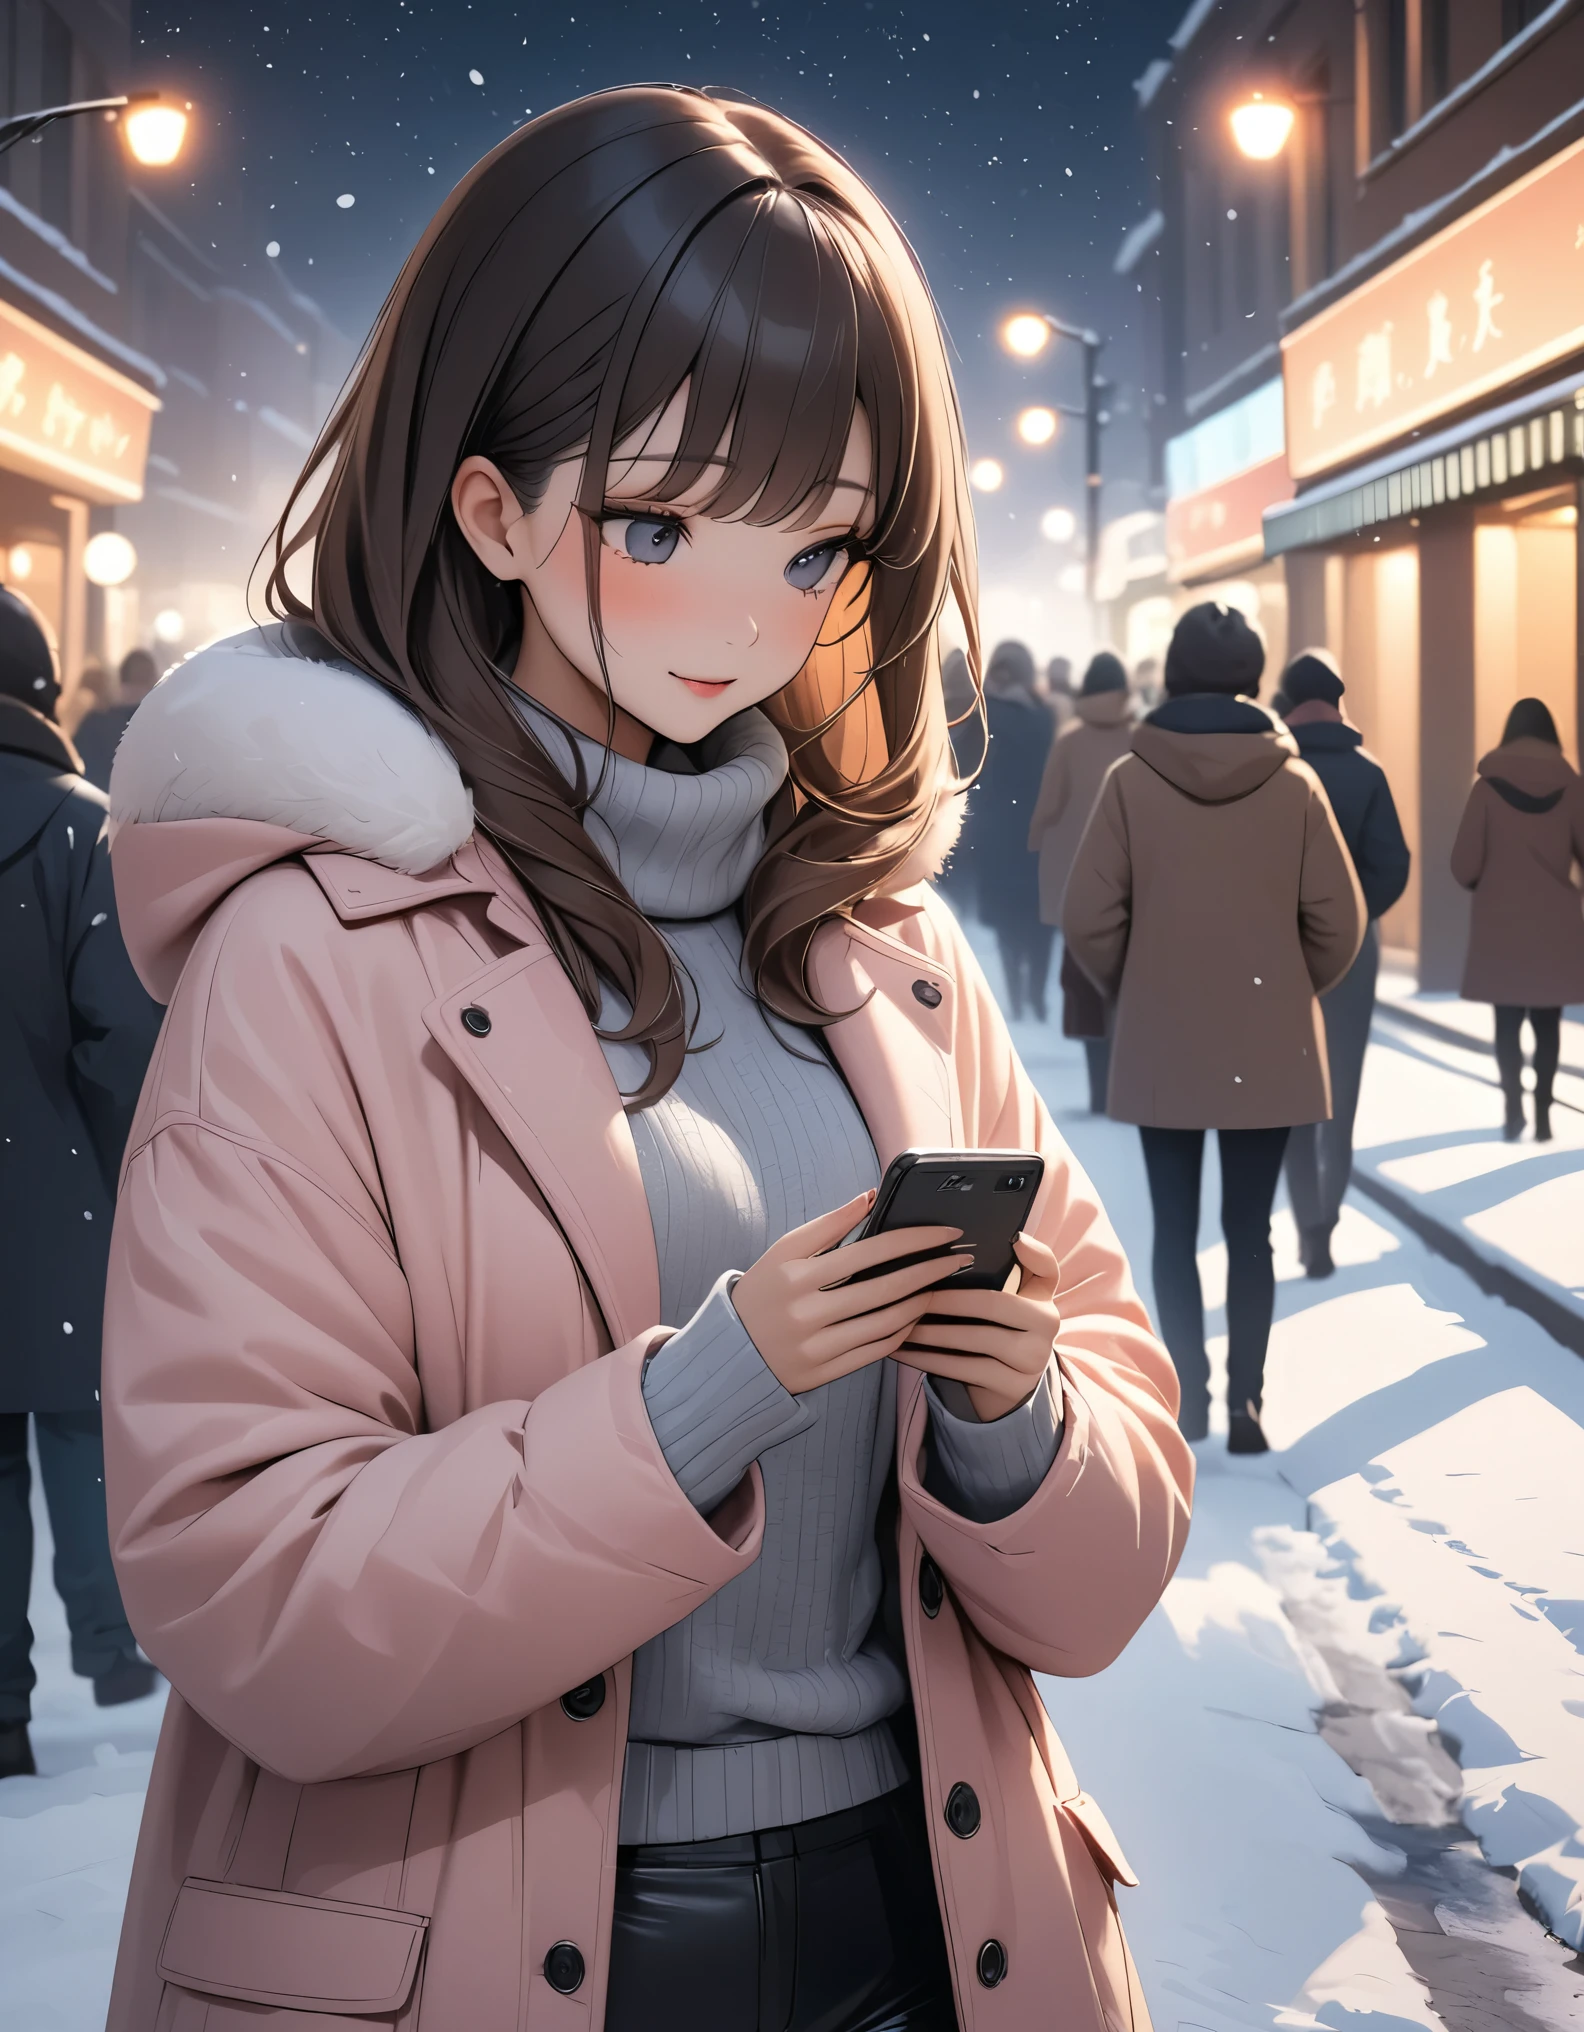 Beautiful woman, street lights at night, Fiddling with smartphones, Hot Pants,  pink, snow, snowing, Passersby, night gradient, fine details, Subtle tones, There is a sense of tranquility in the picture.  